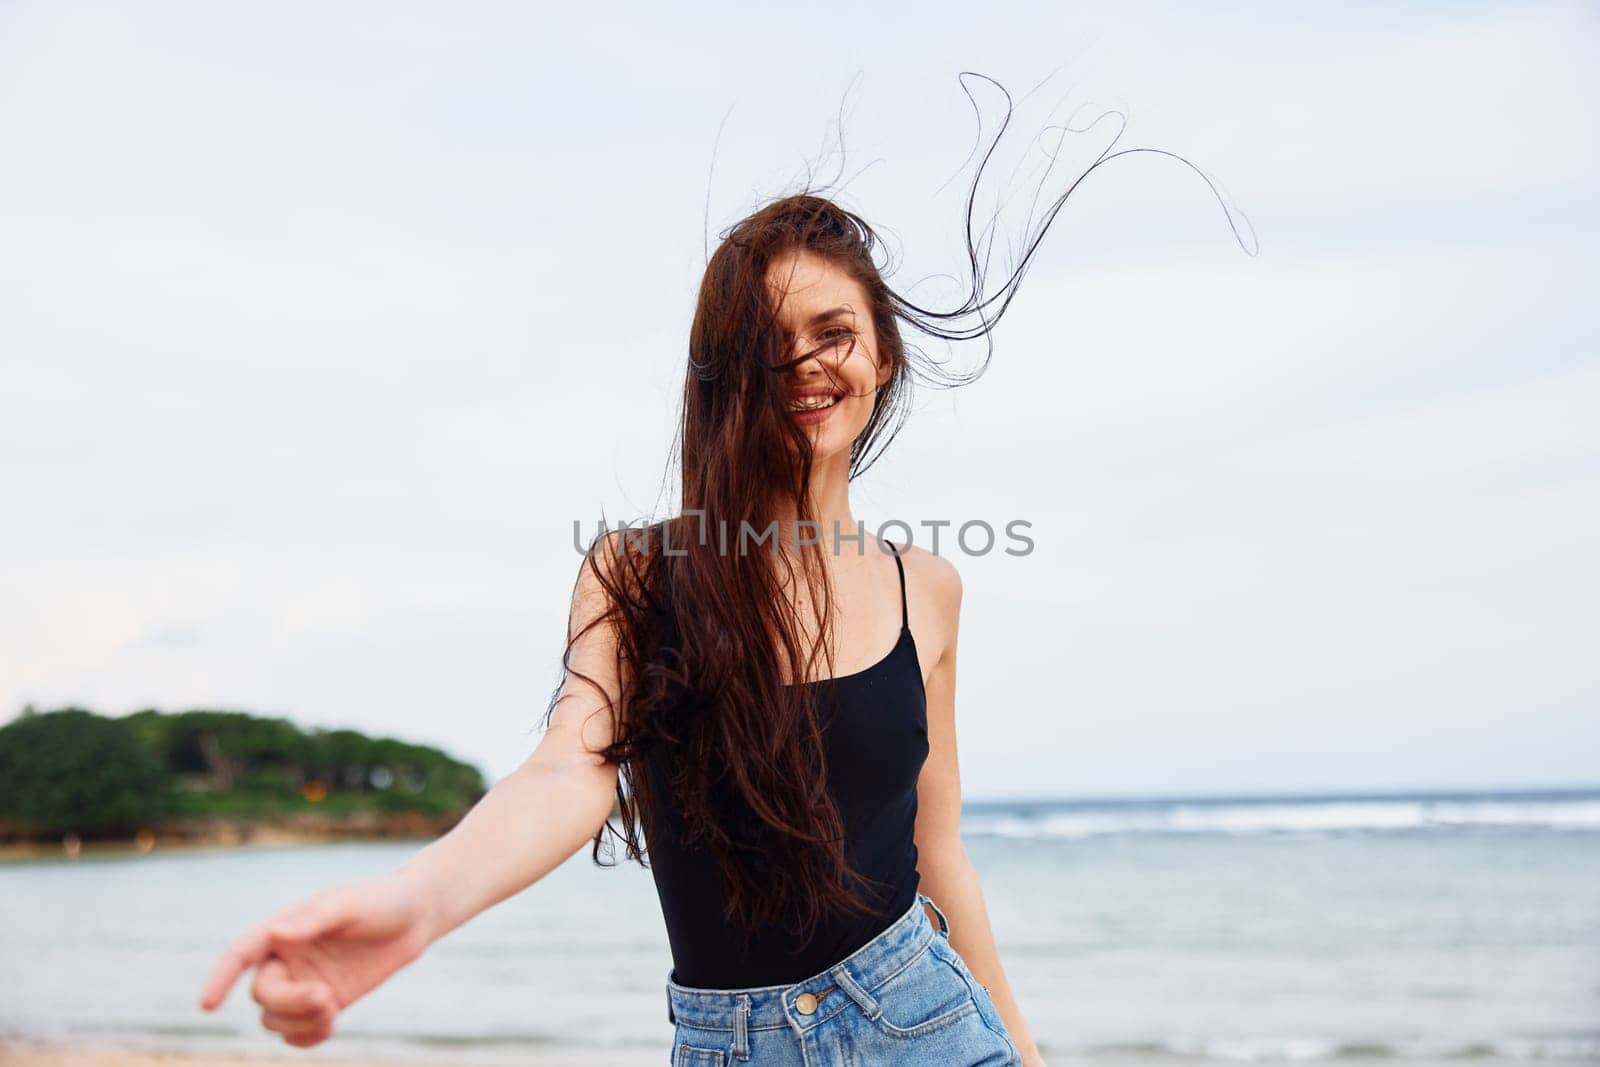 woman young water sunset vacation smiling travel freedom beautiful lifestyle leisure sea running active body smile hair hair summer long beach beauty